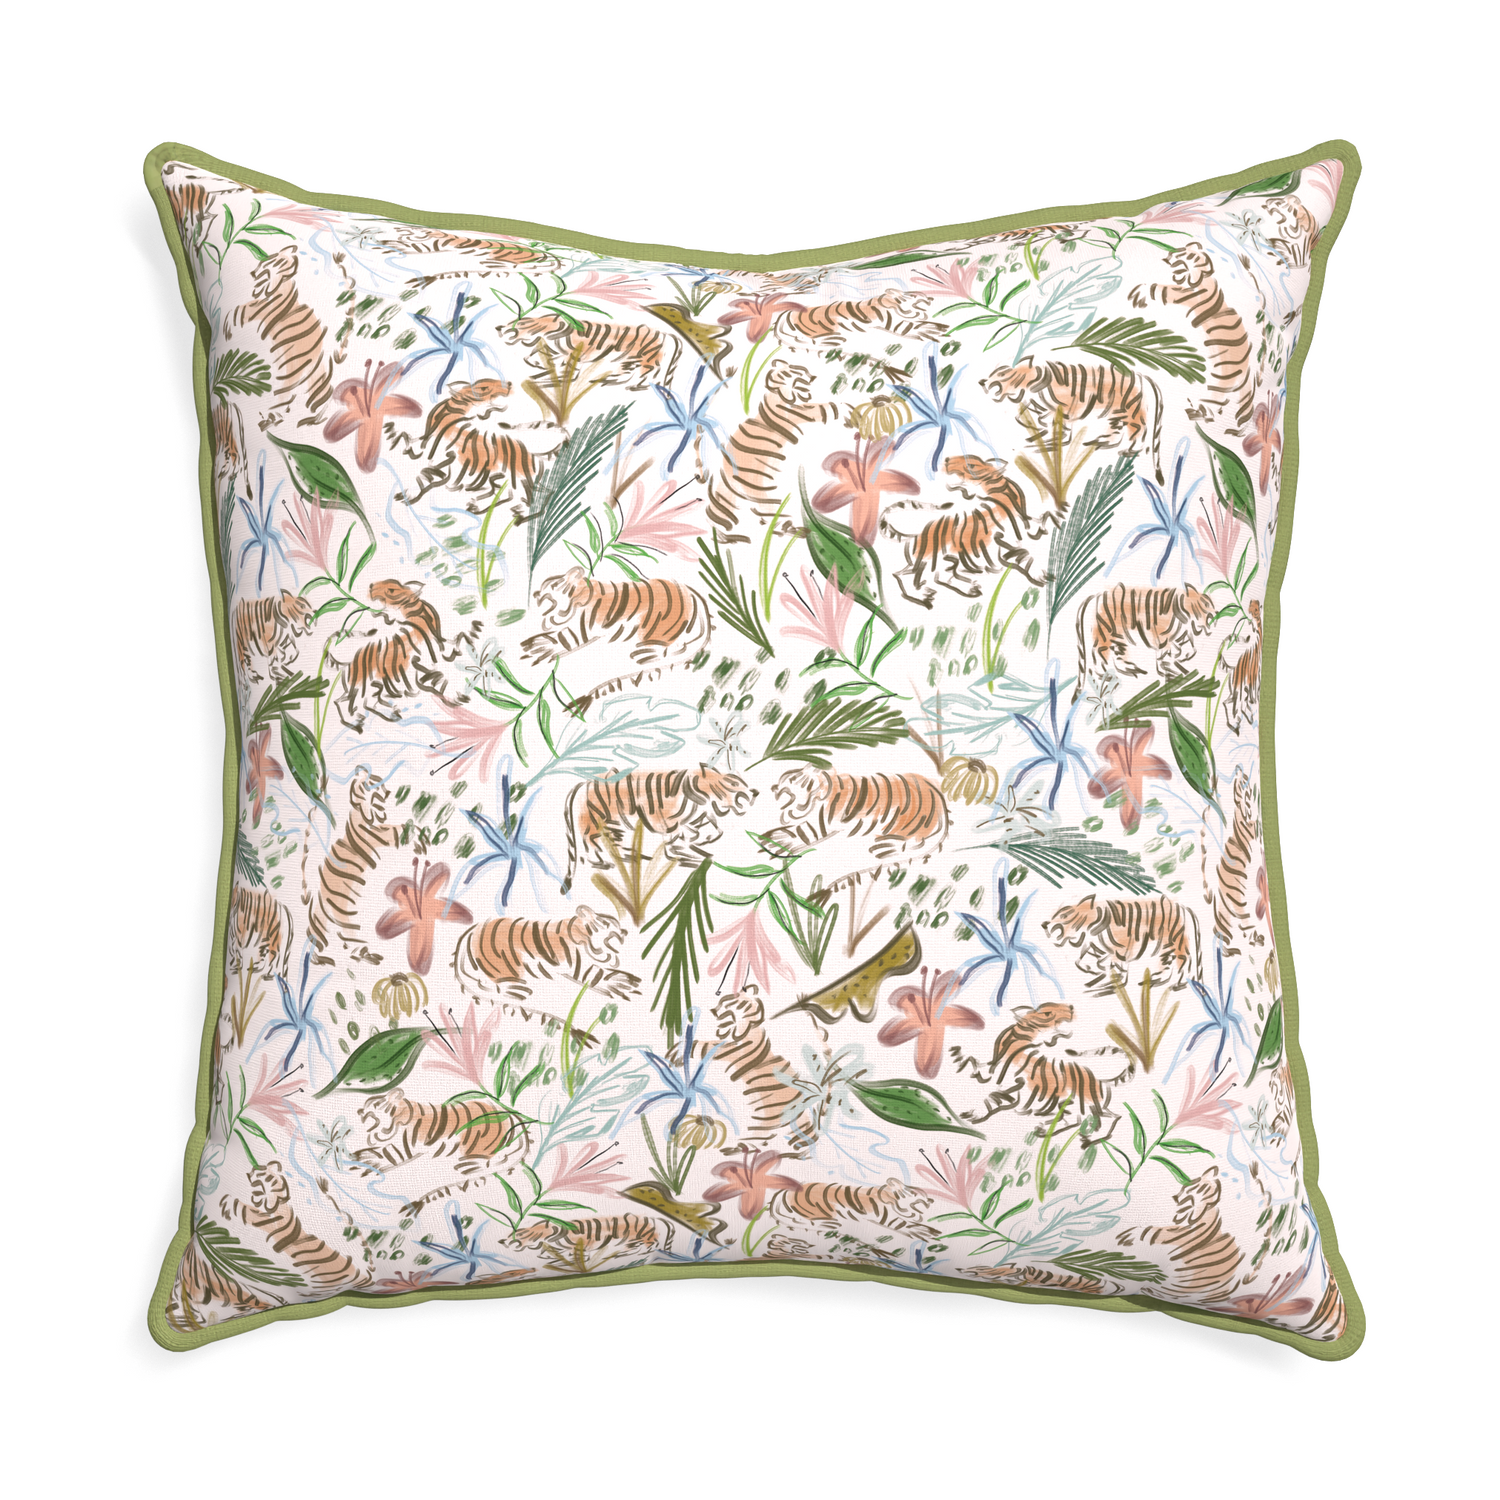 Euro-sham frida pink custom pillow with moss piping on white background